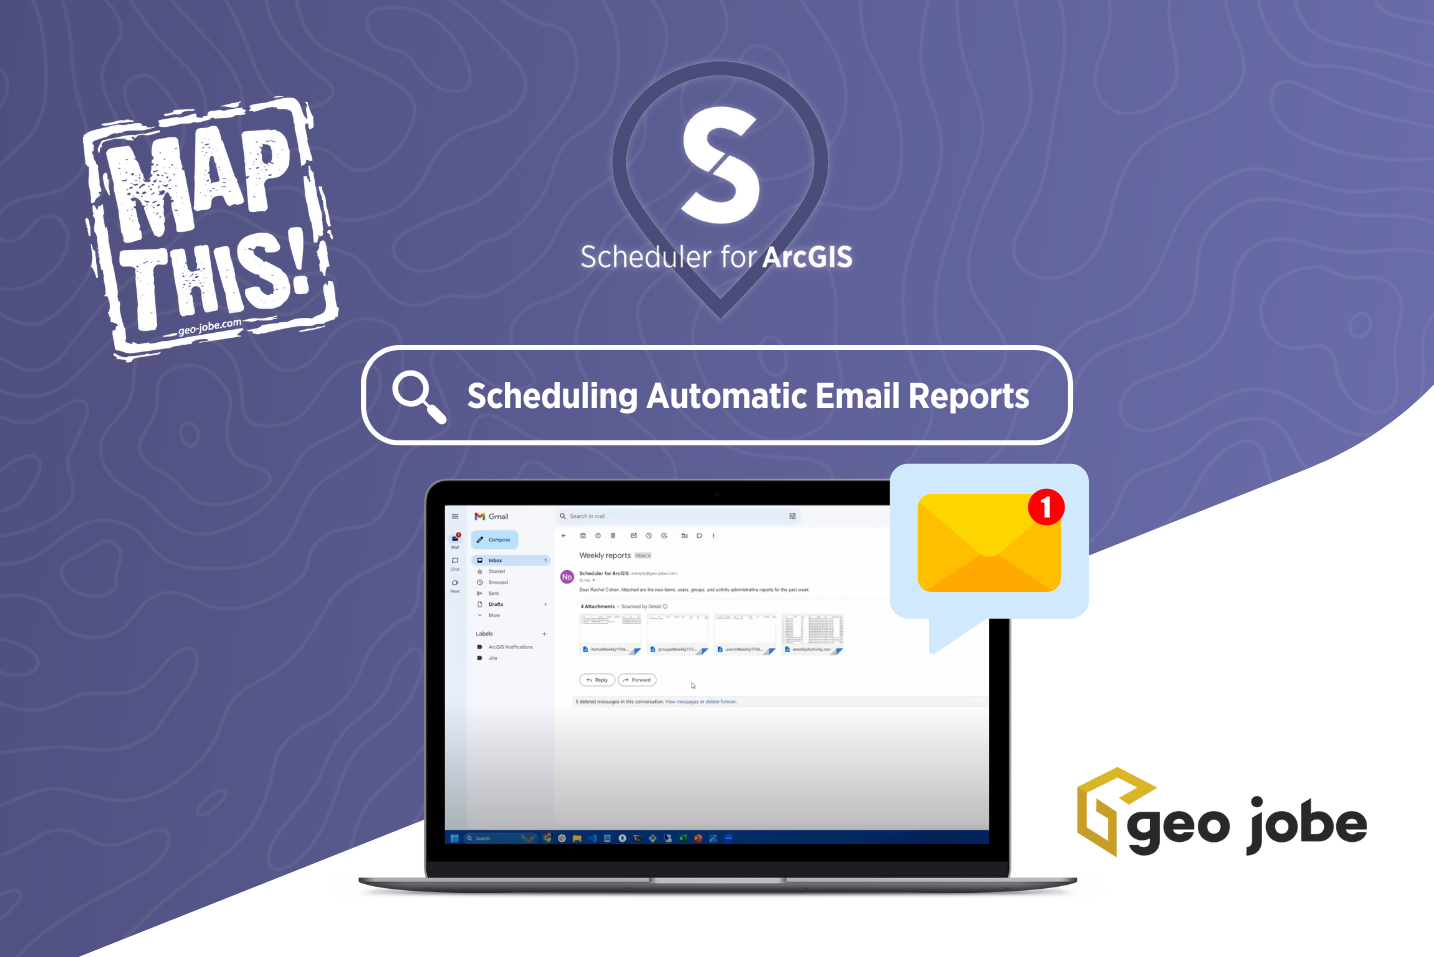 Scheduler for ArcGIS: Scheduling Automatic Email Reports